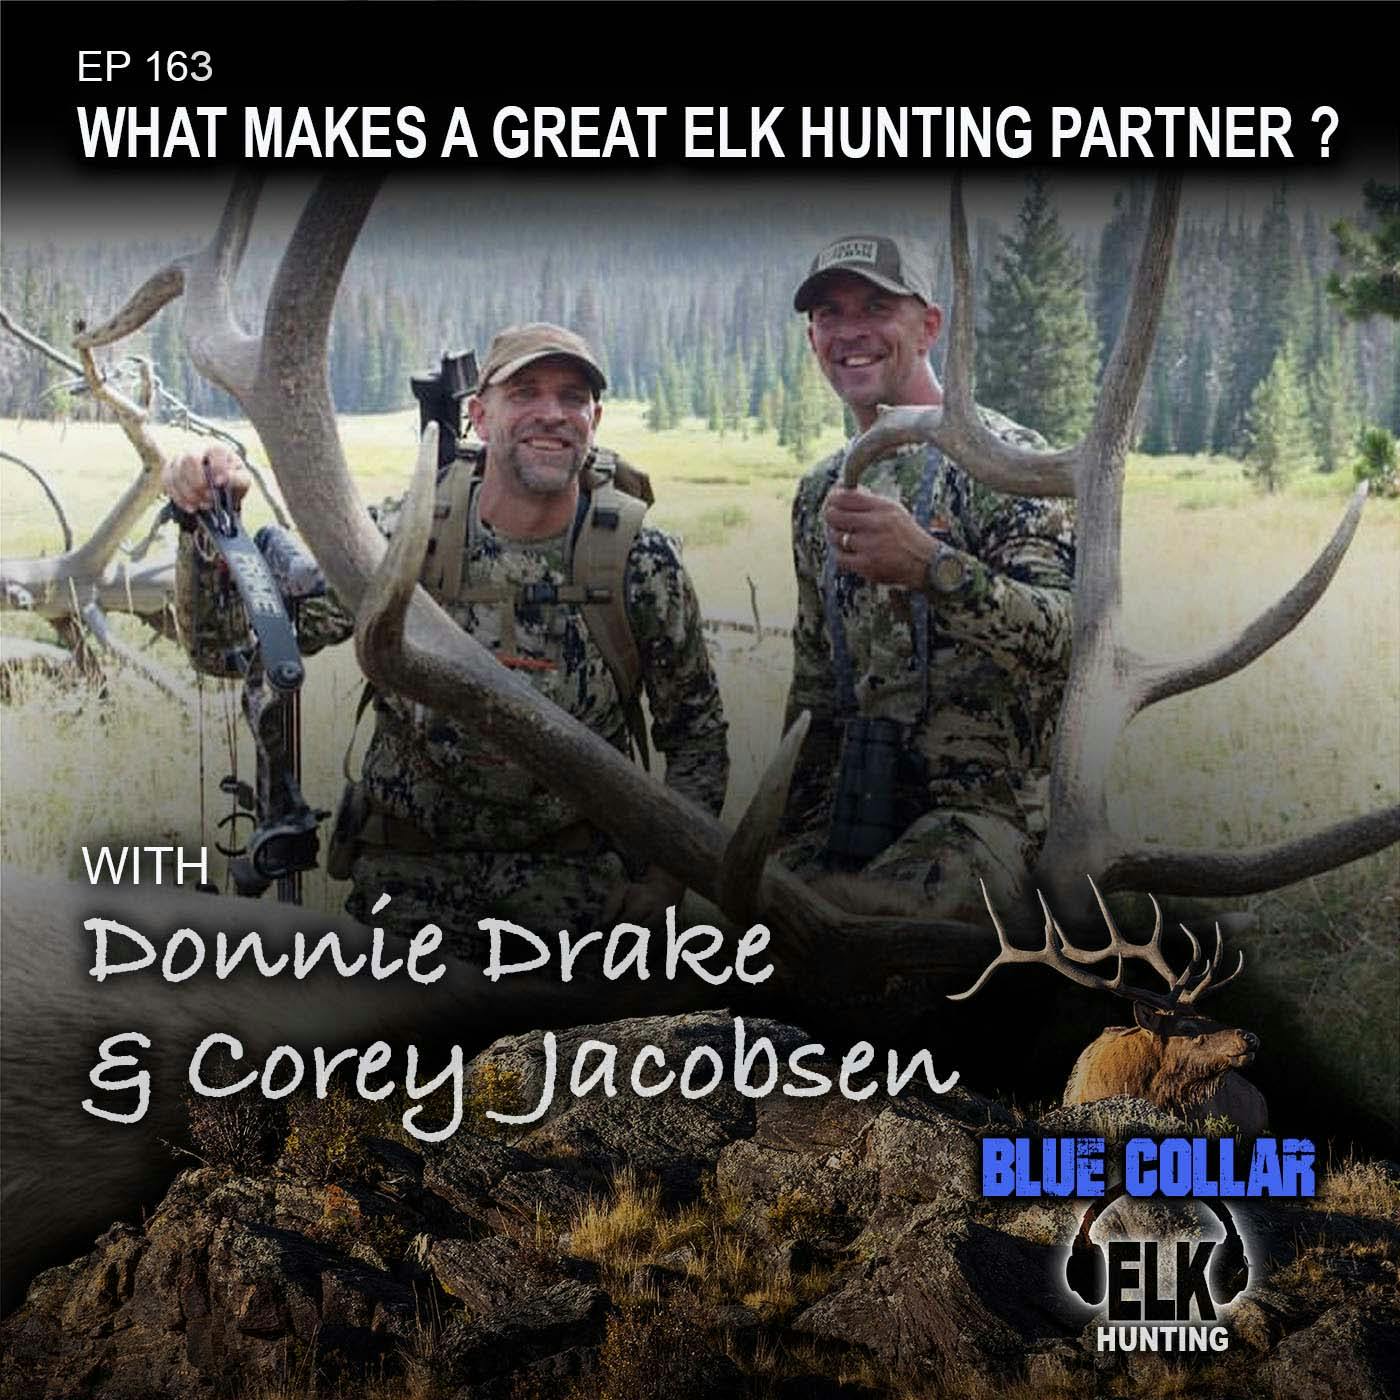 EP 163: Corey Jacobson & Donnie Drake - What Makes a Great Elk Hunting Partner?